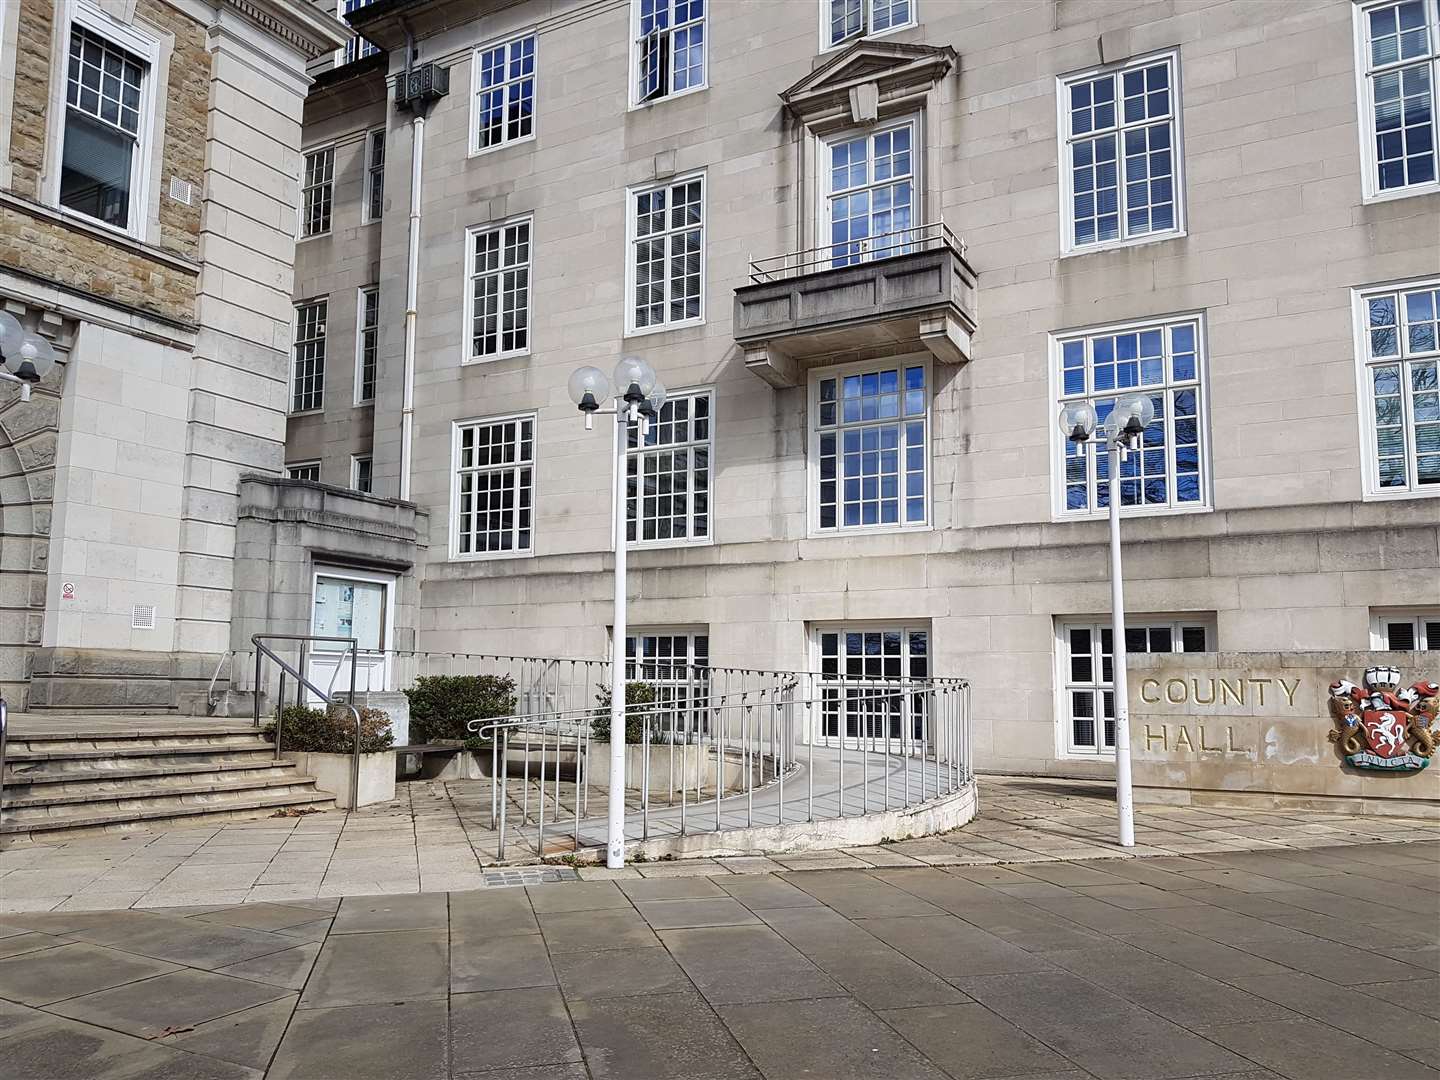 County Hall in Maidstone, headquarters for KCC